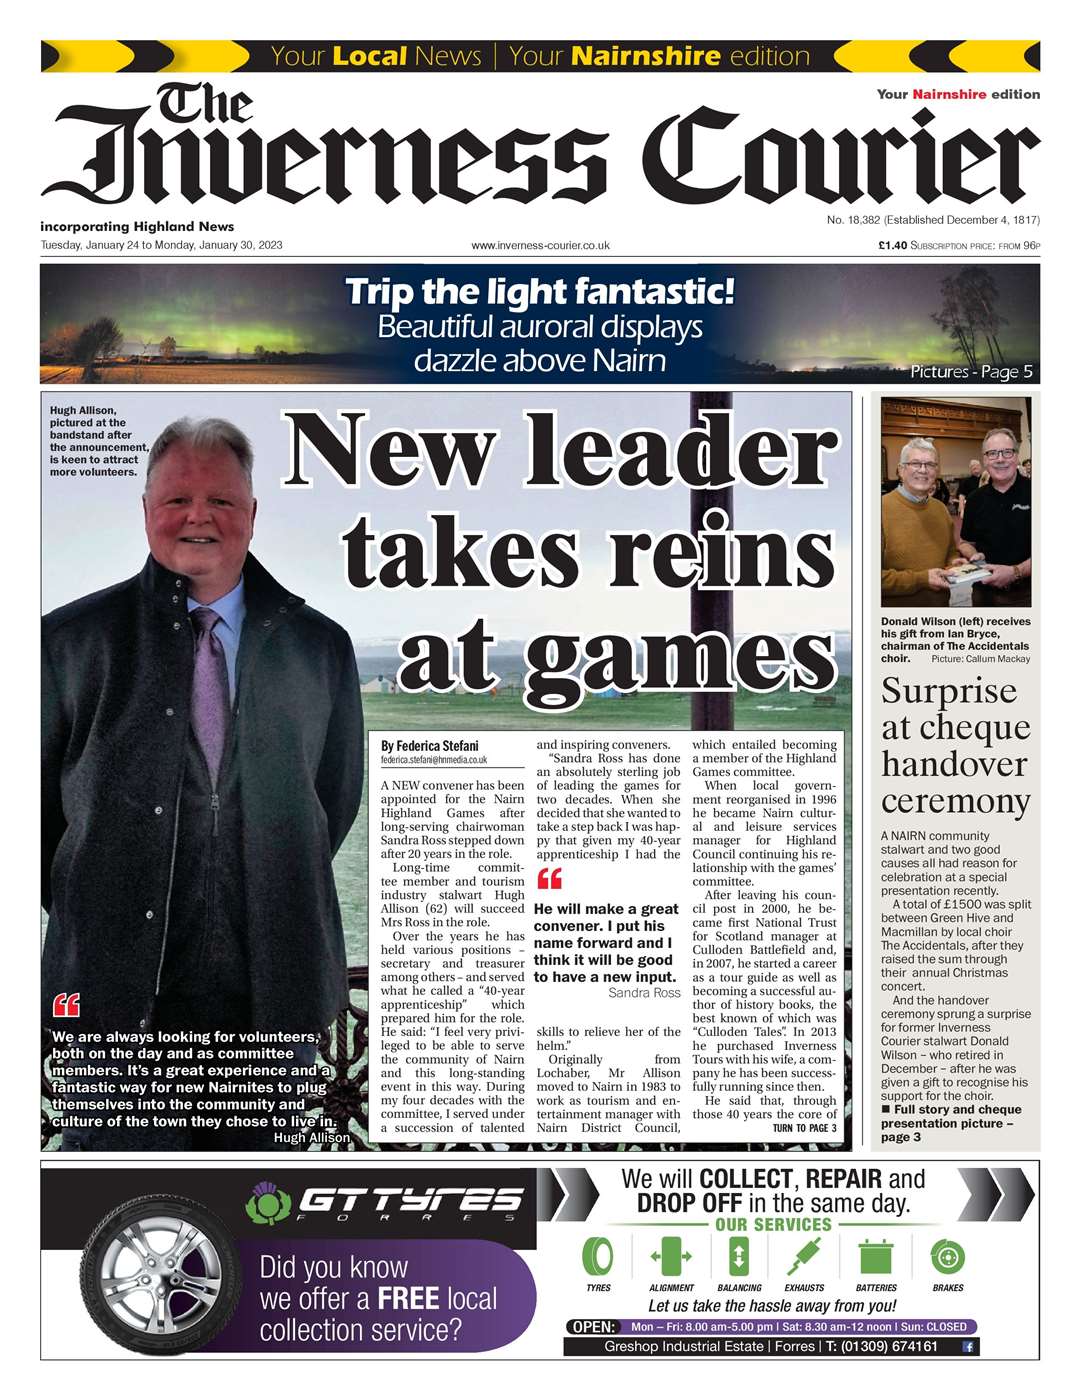 The Inverness Courier (Nairnshire edition), January 24, front page.